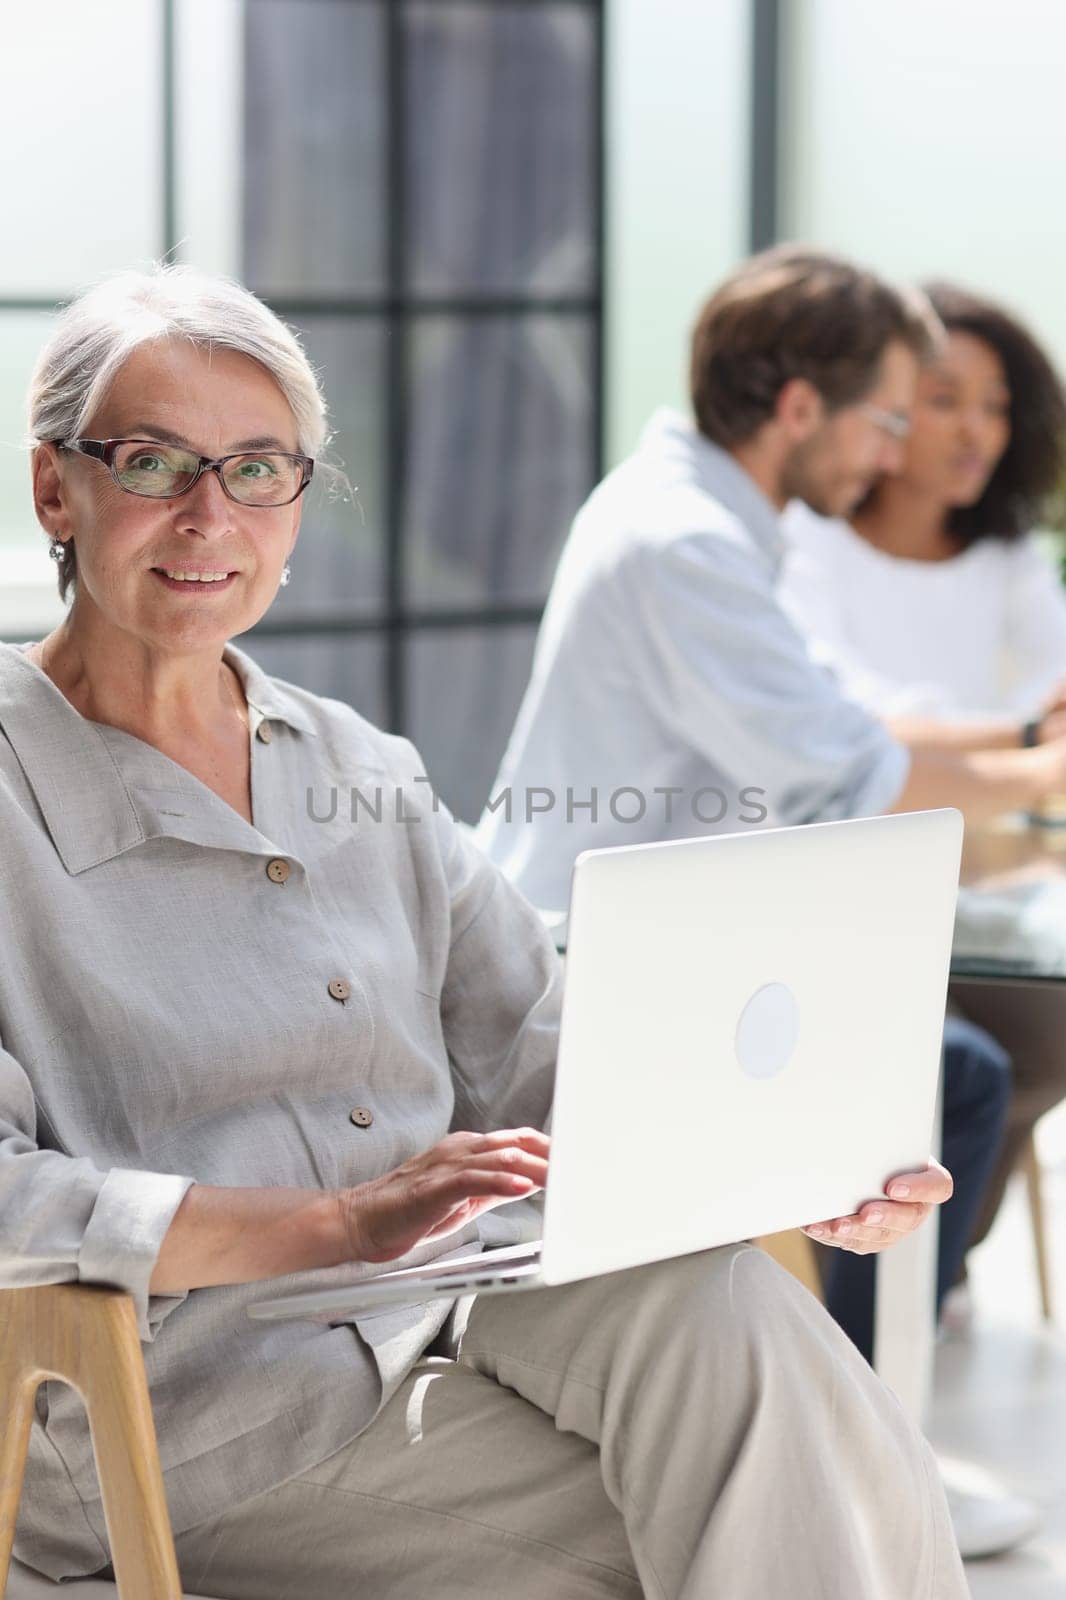 mature woman sitting with laptop looking at camera.